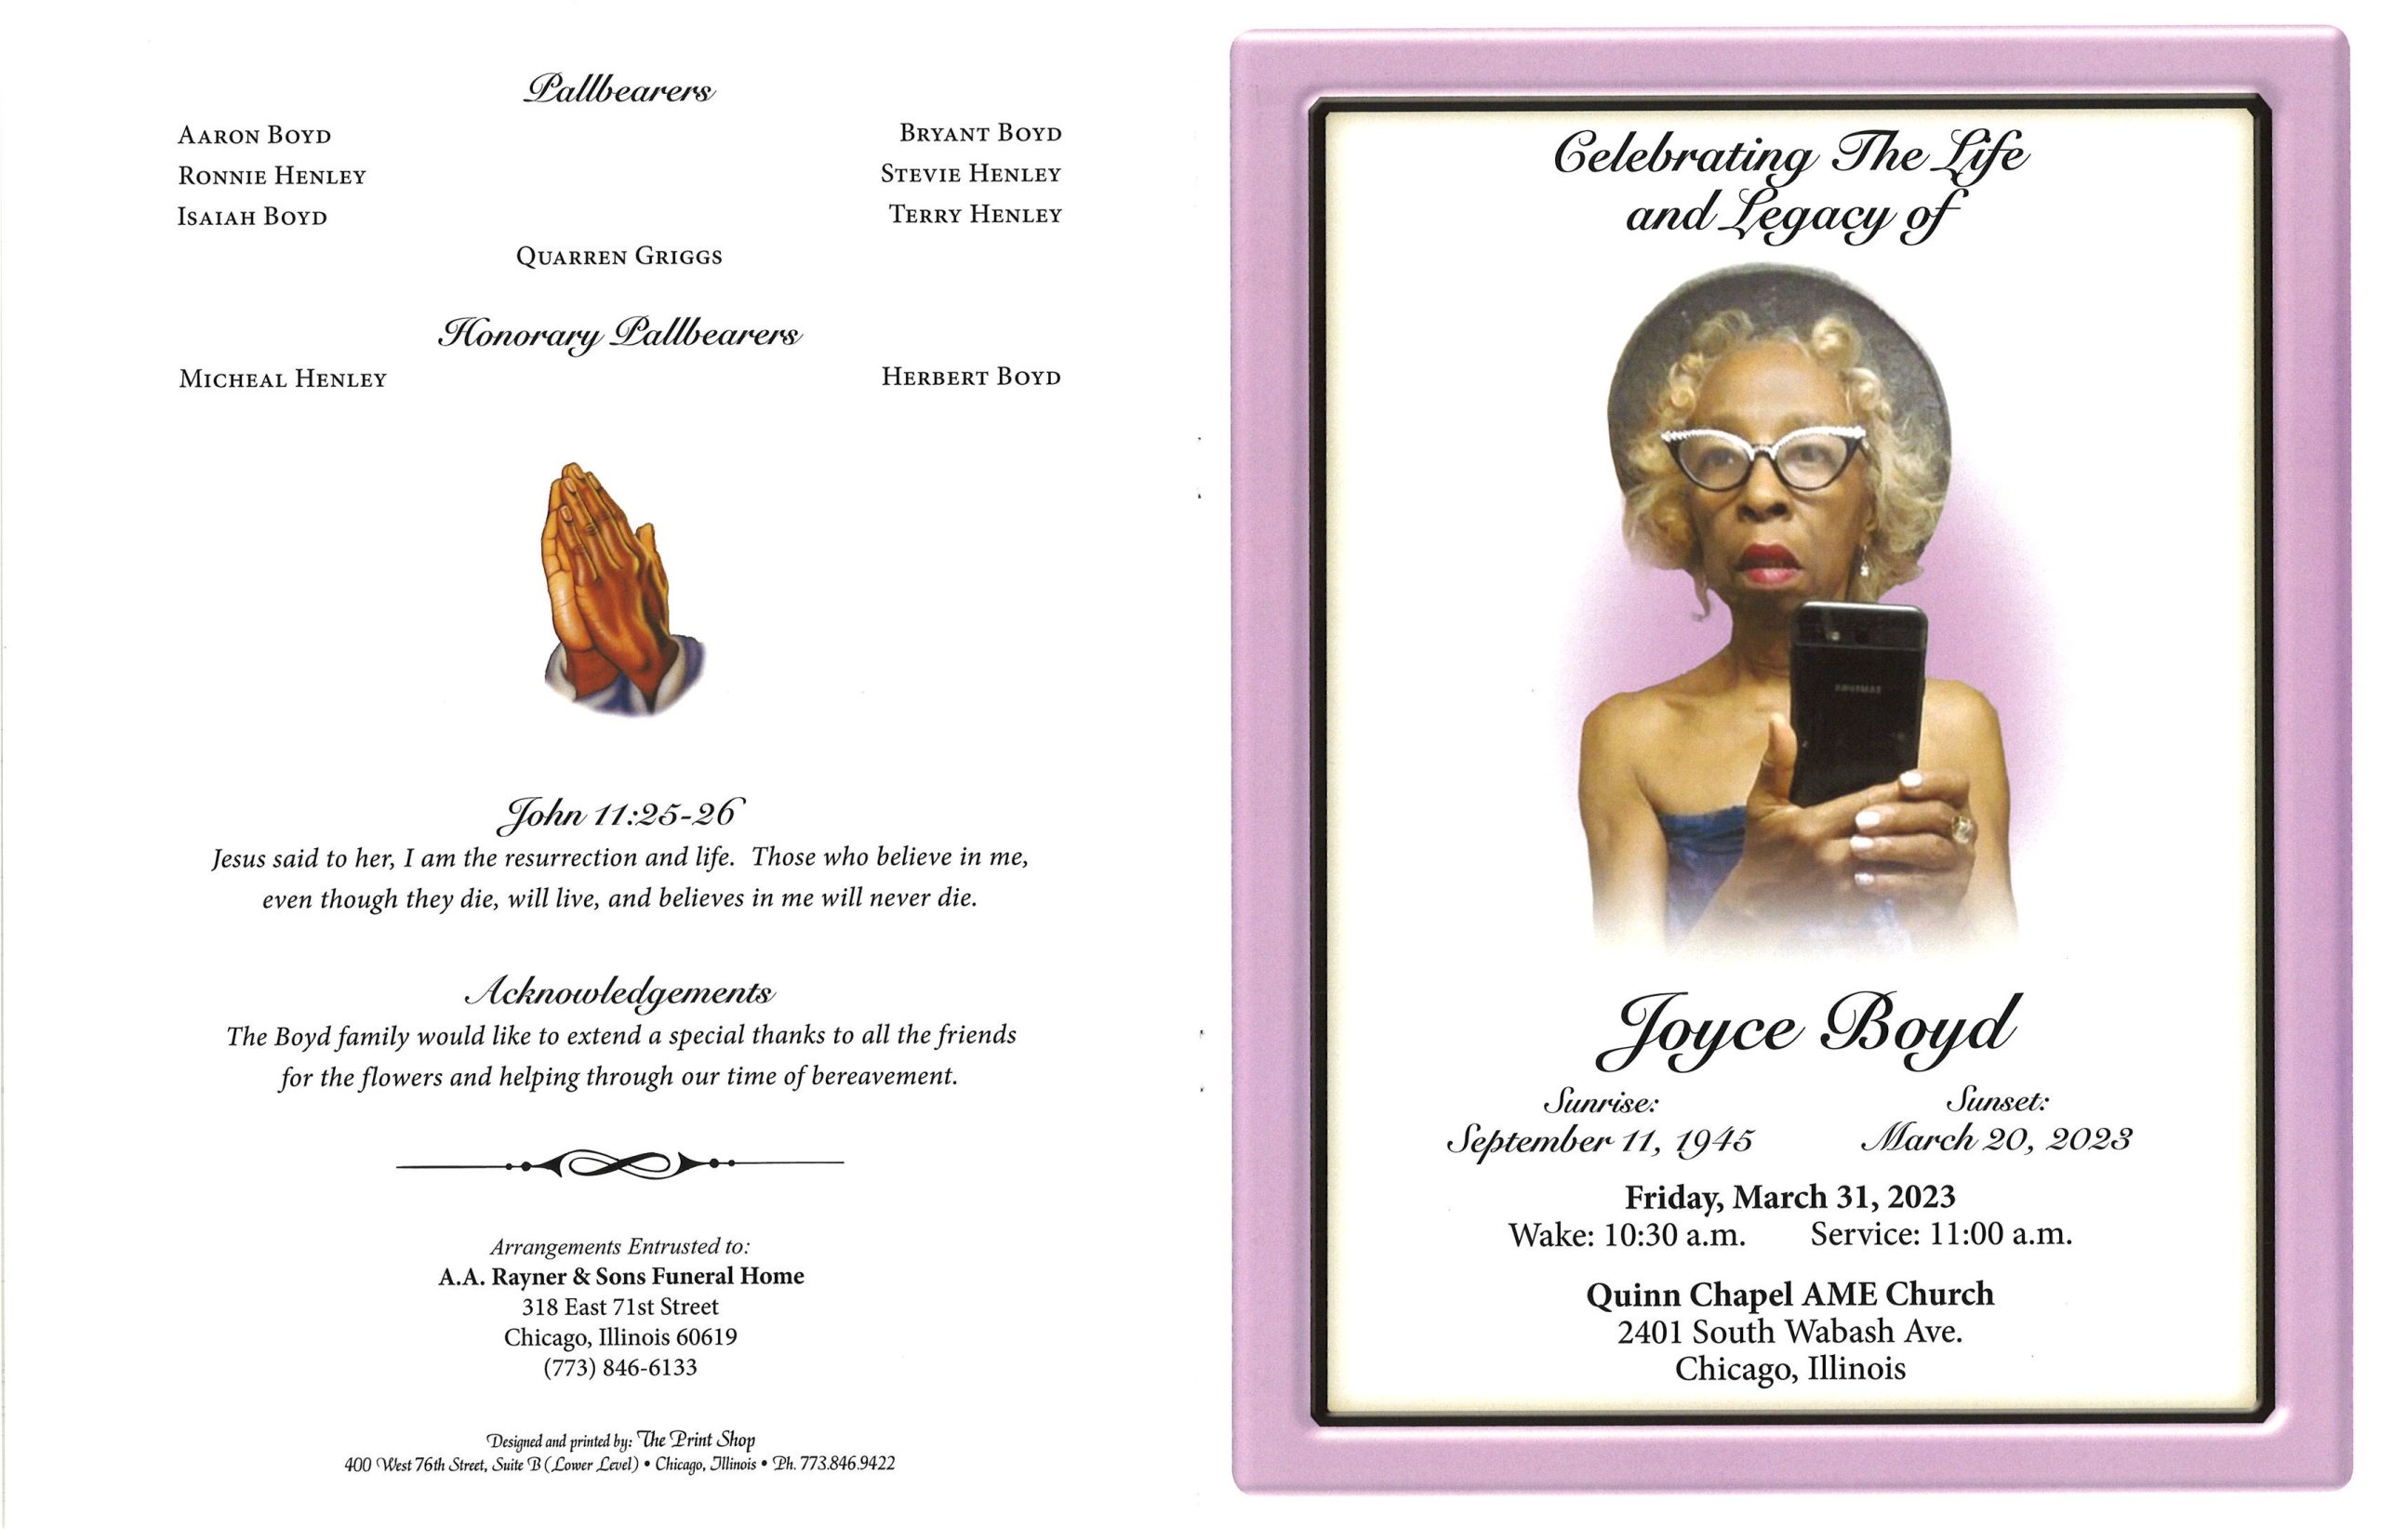 Joyce Boyd Obituary AA Rayner and Sons Funeral Homes